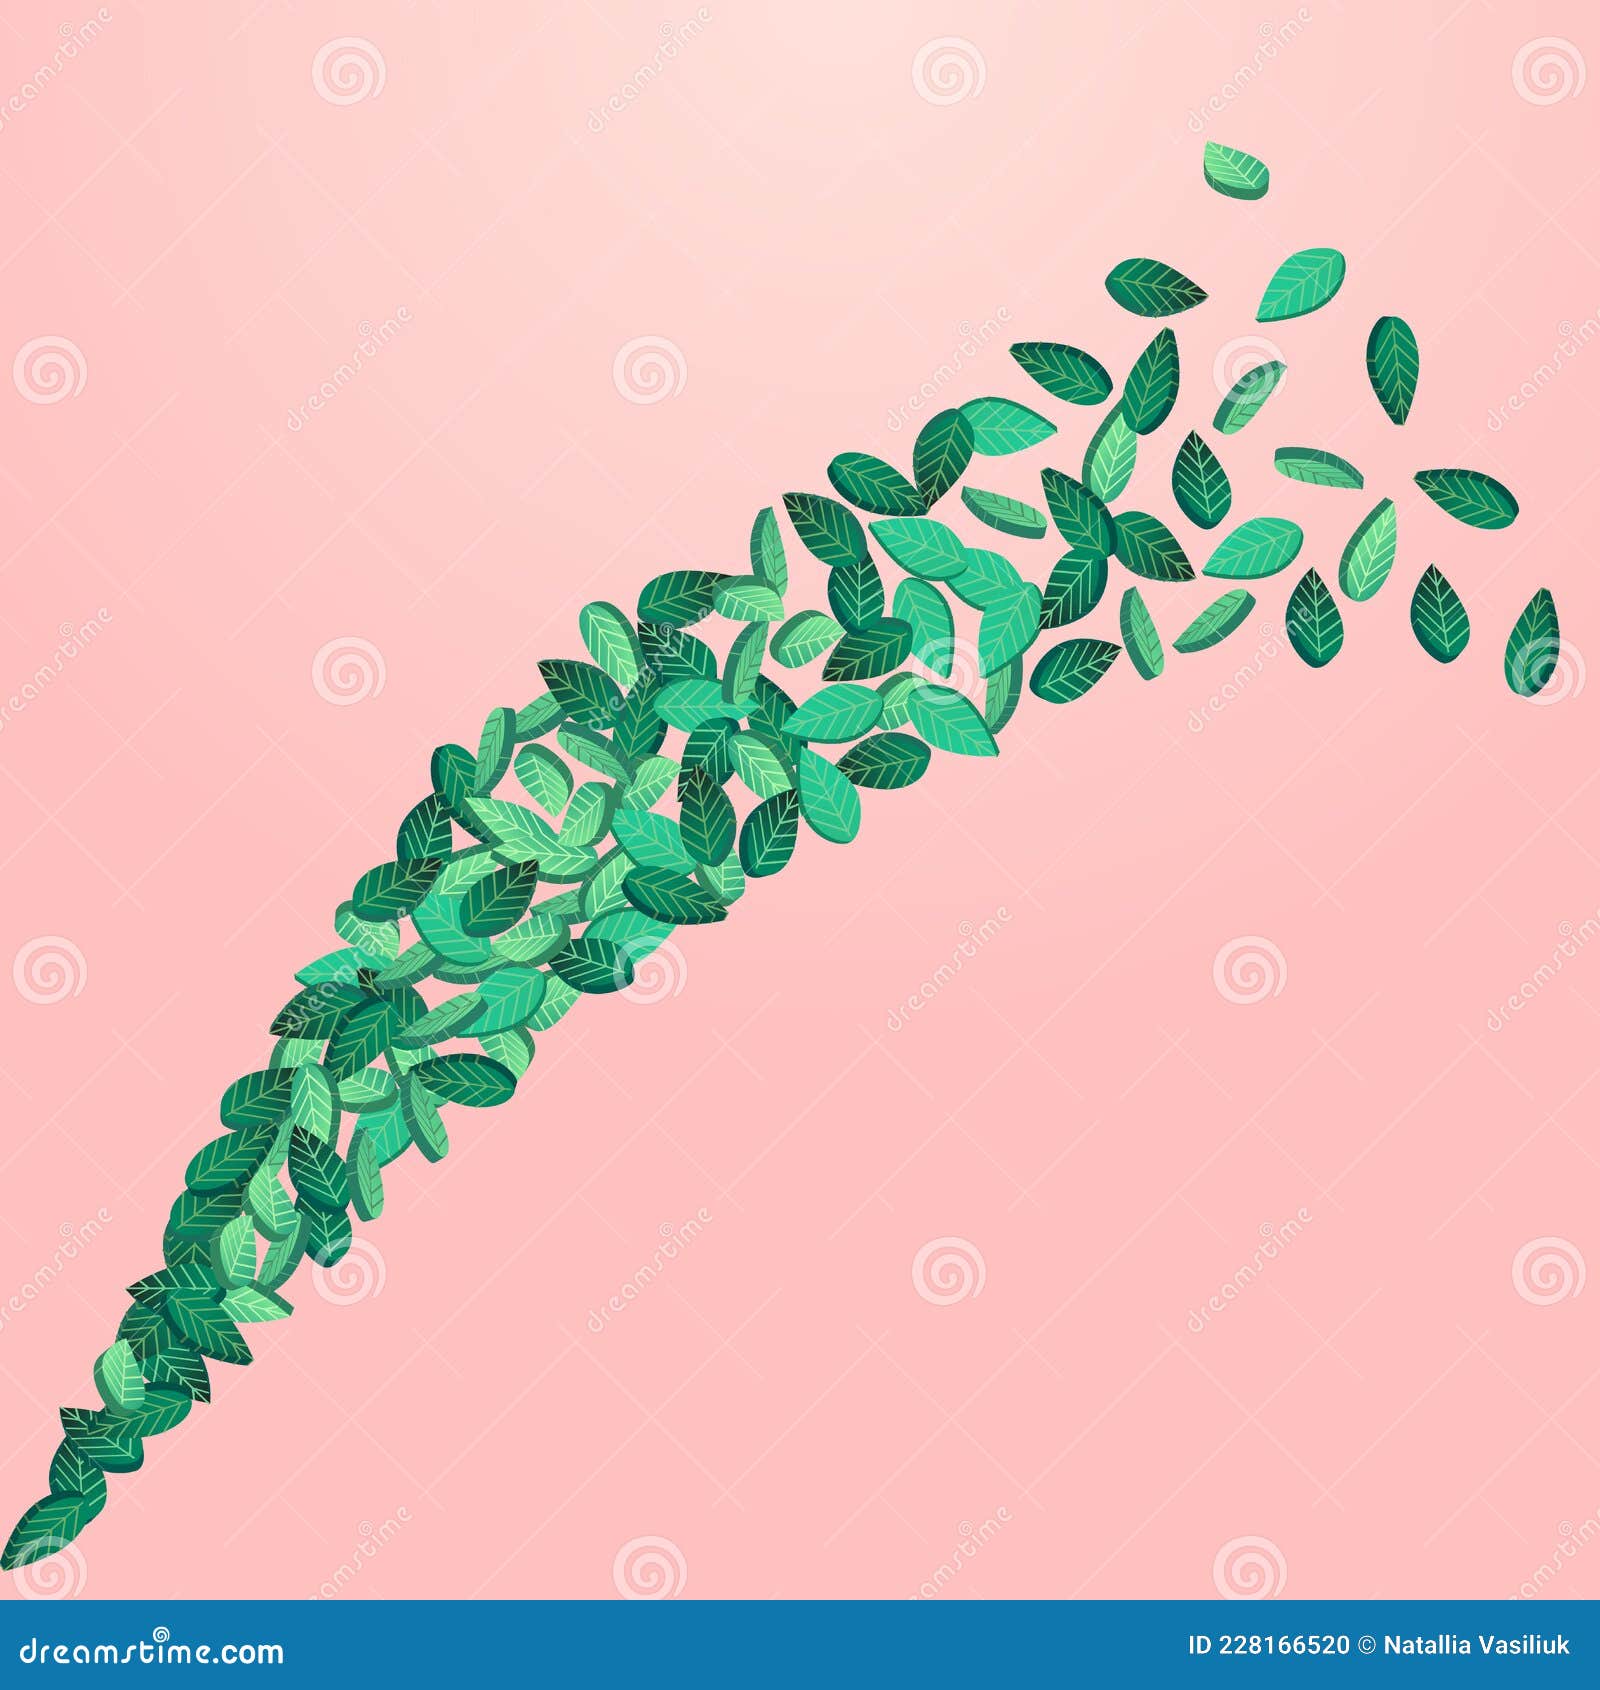 Green Leaf Realistic Vector Pink Background Stock Vector - Illustration